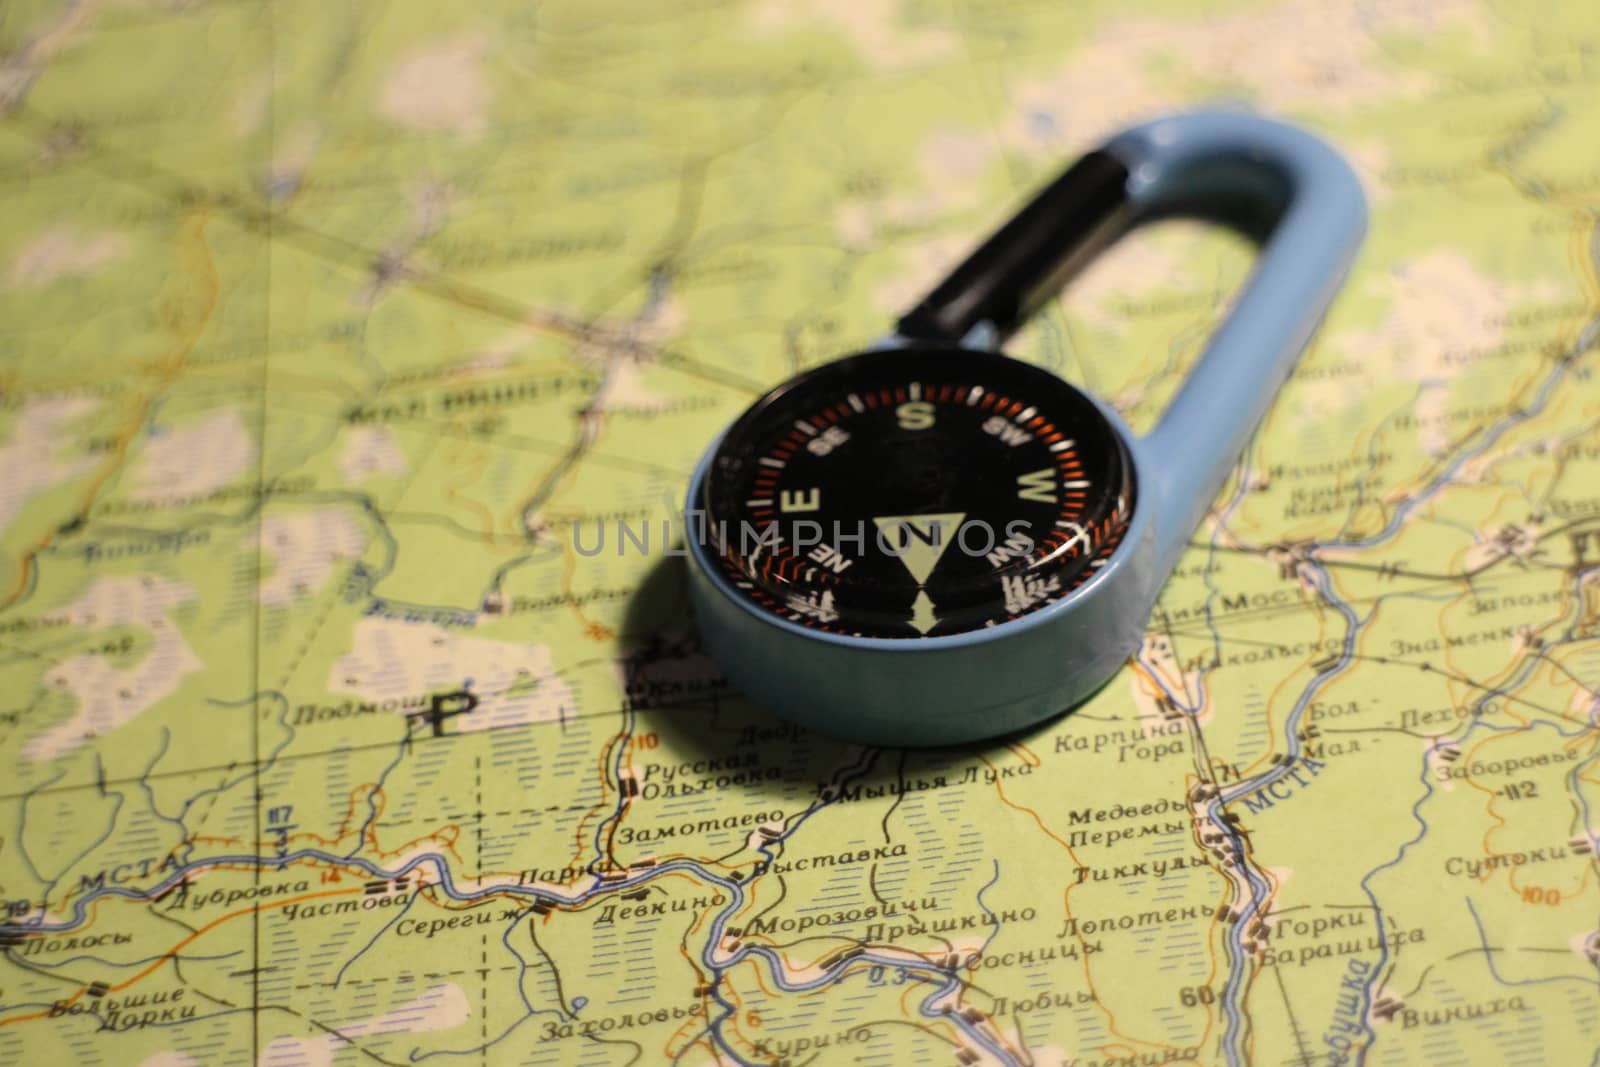 compass is on the navigational map orientation